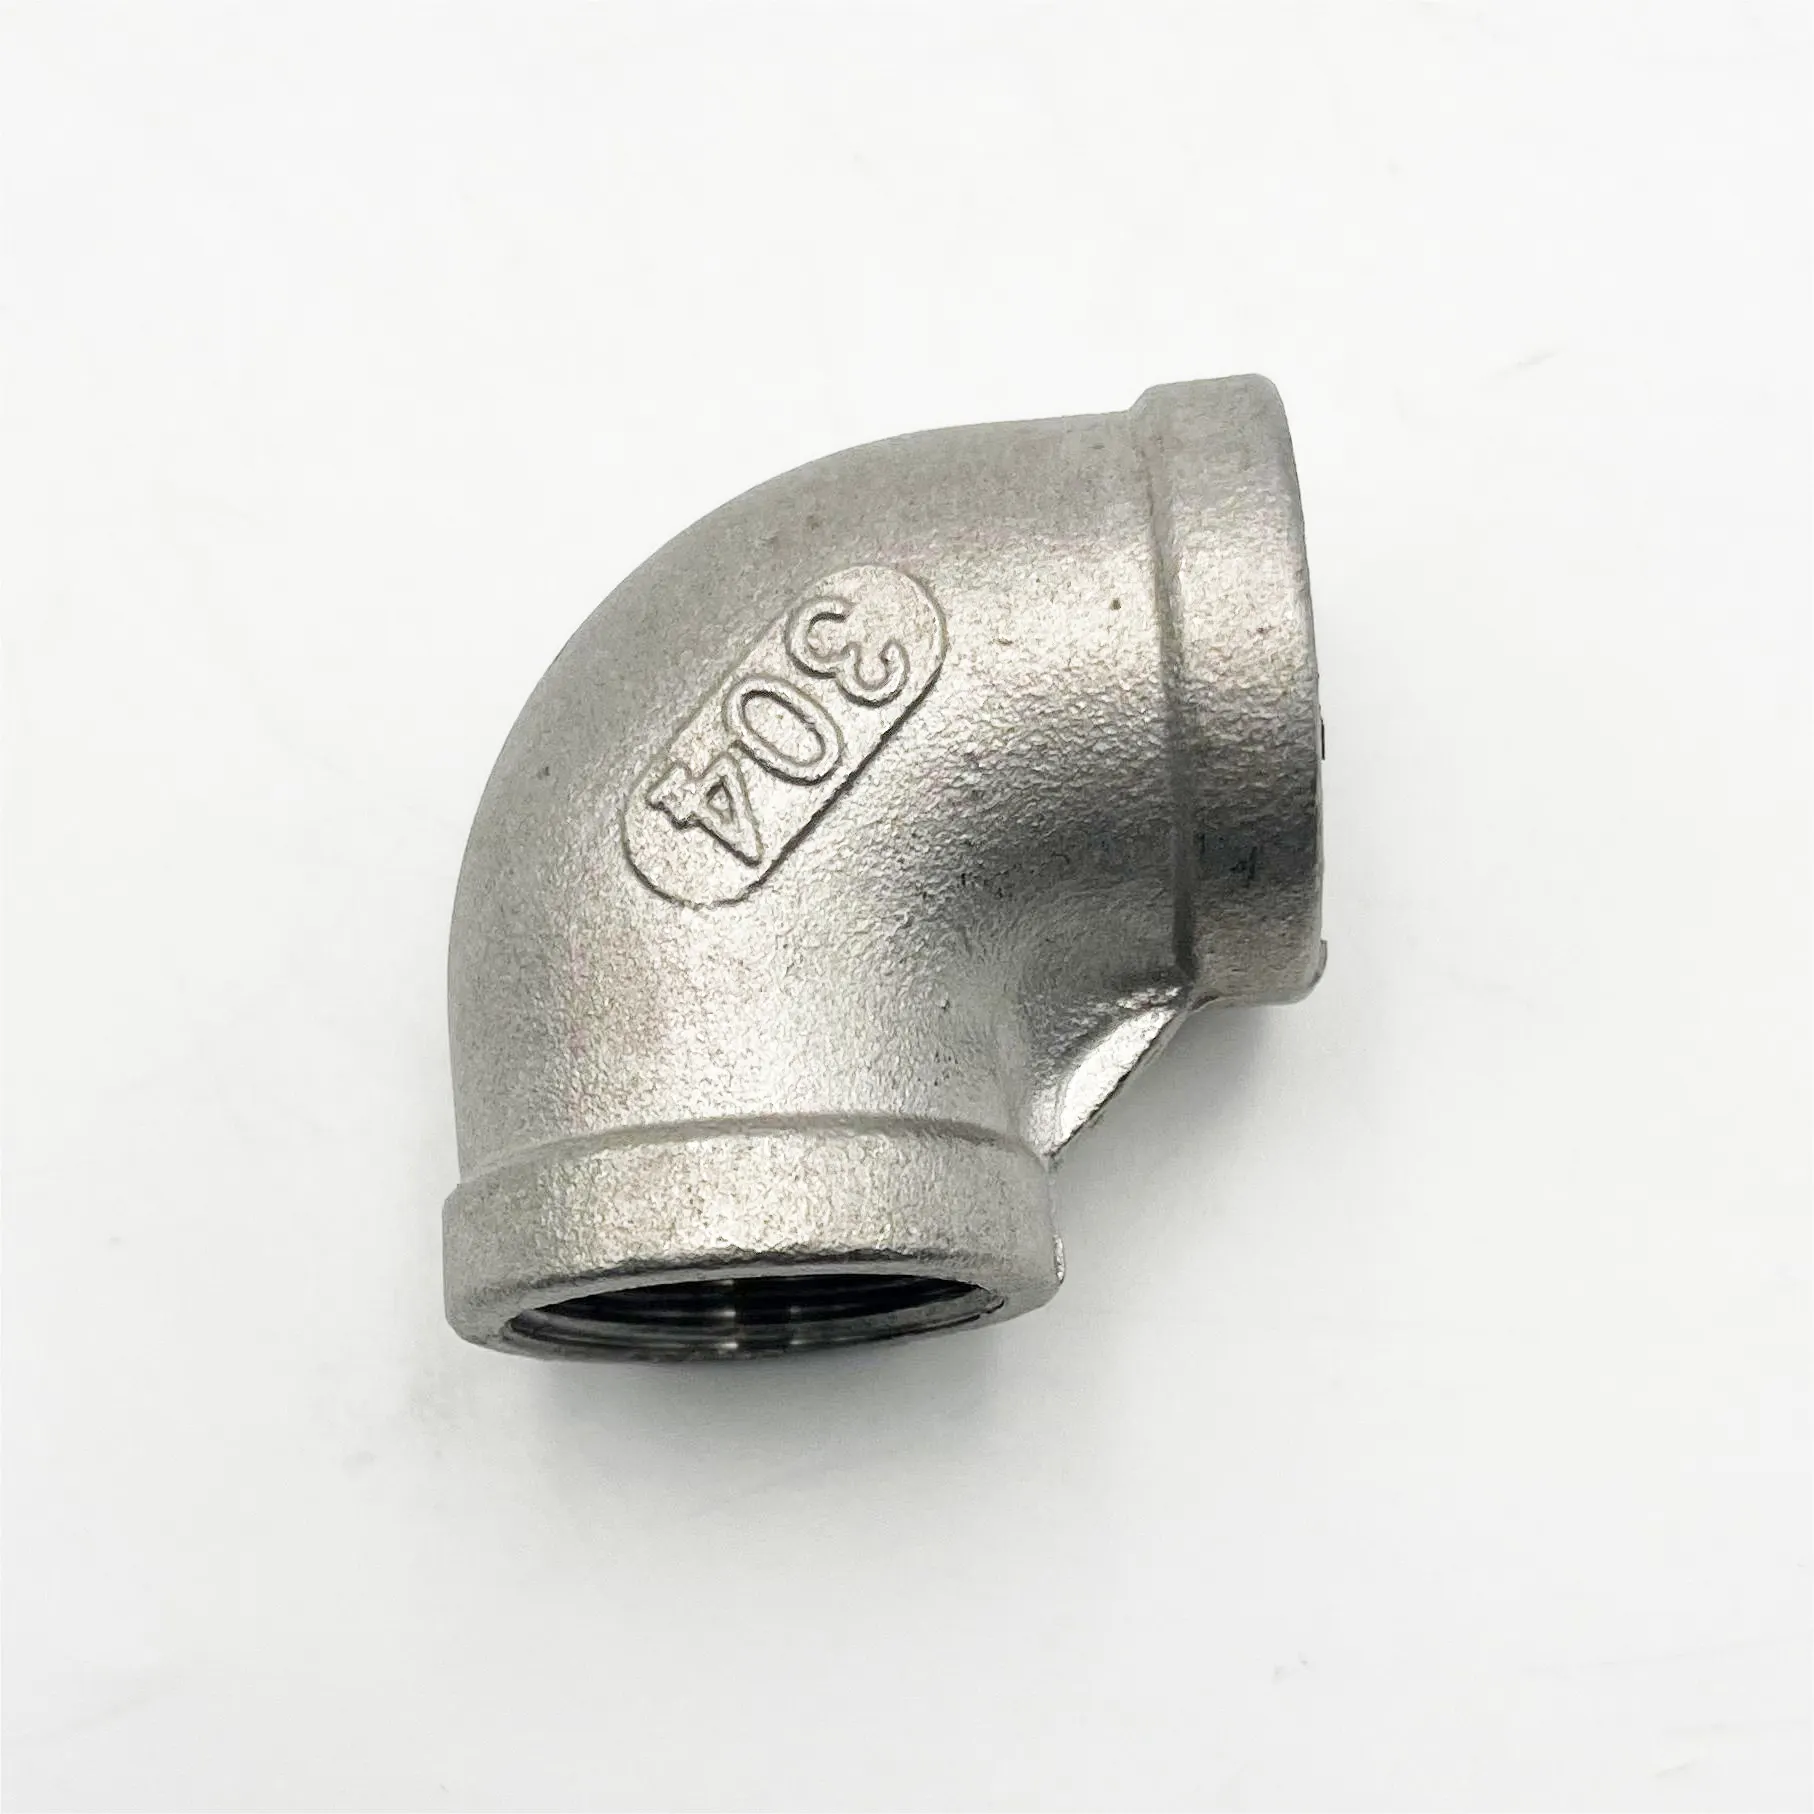 Best selling chemical grade Industrial Grade Stainless Steel Pipe Fittings 90 elbow 90 degree elbow